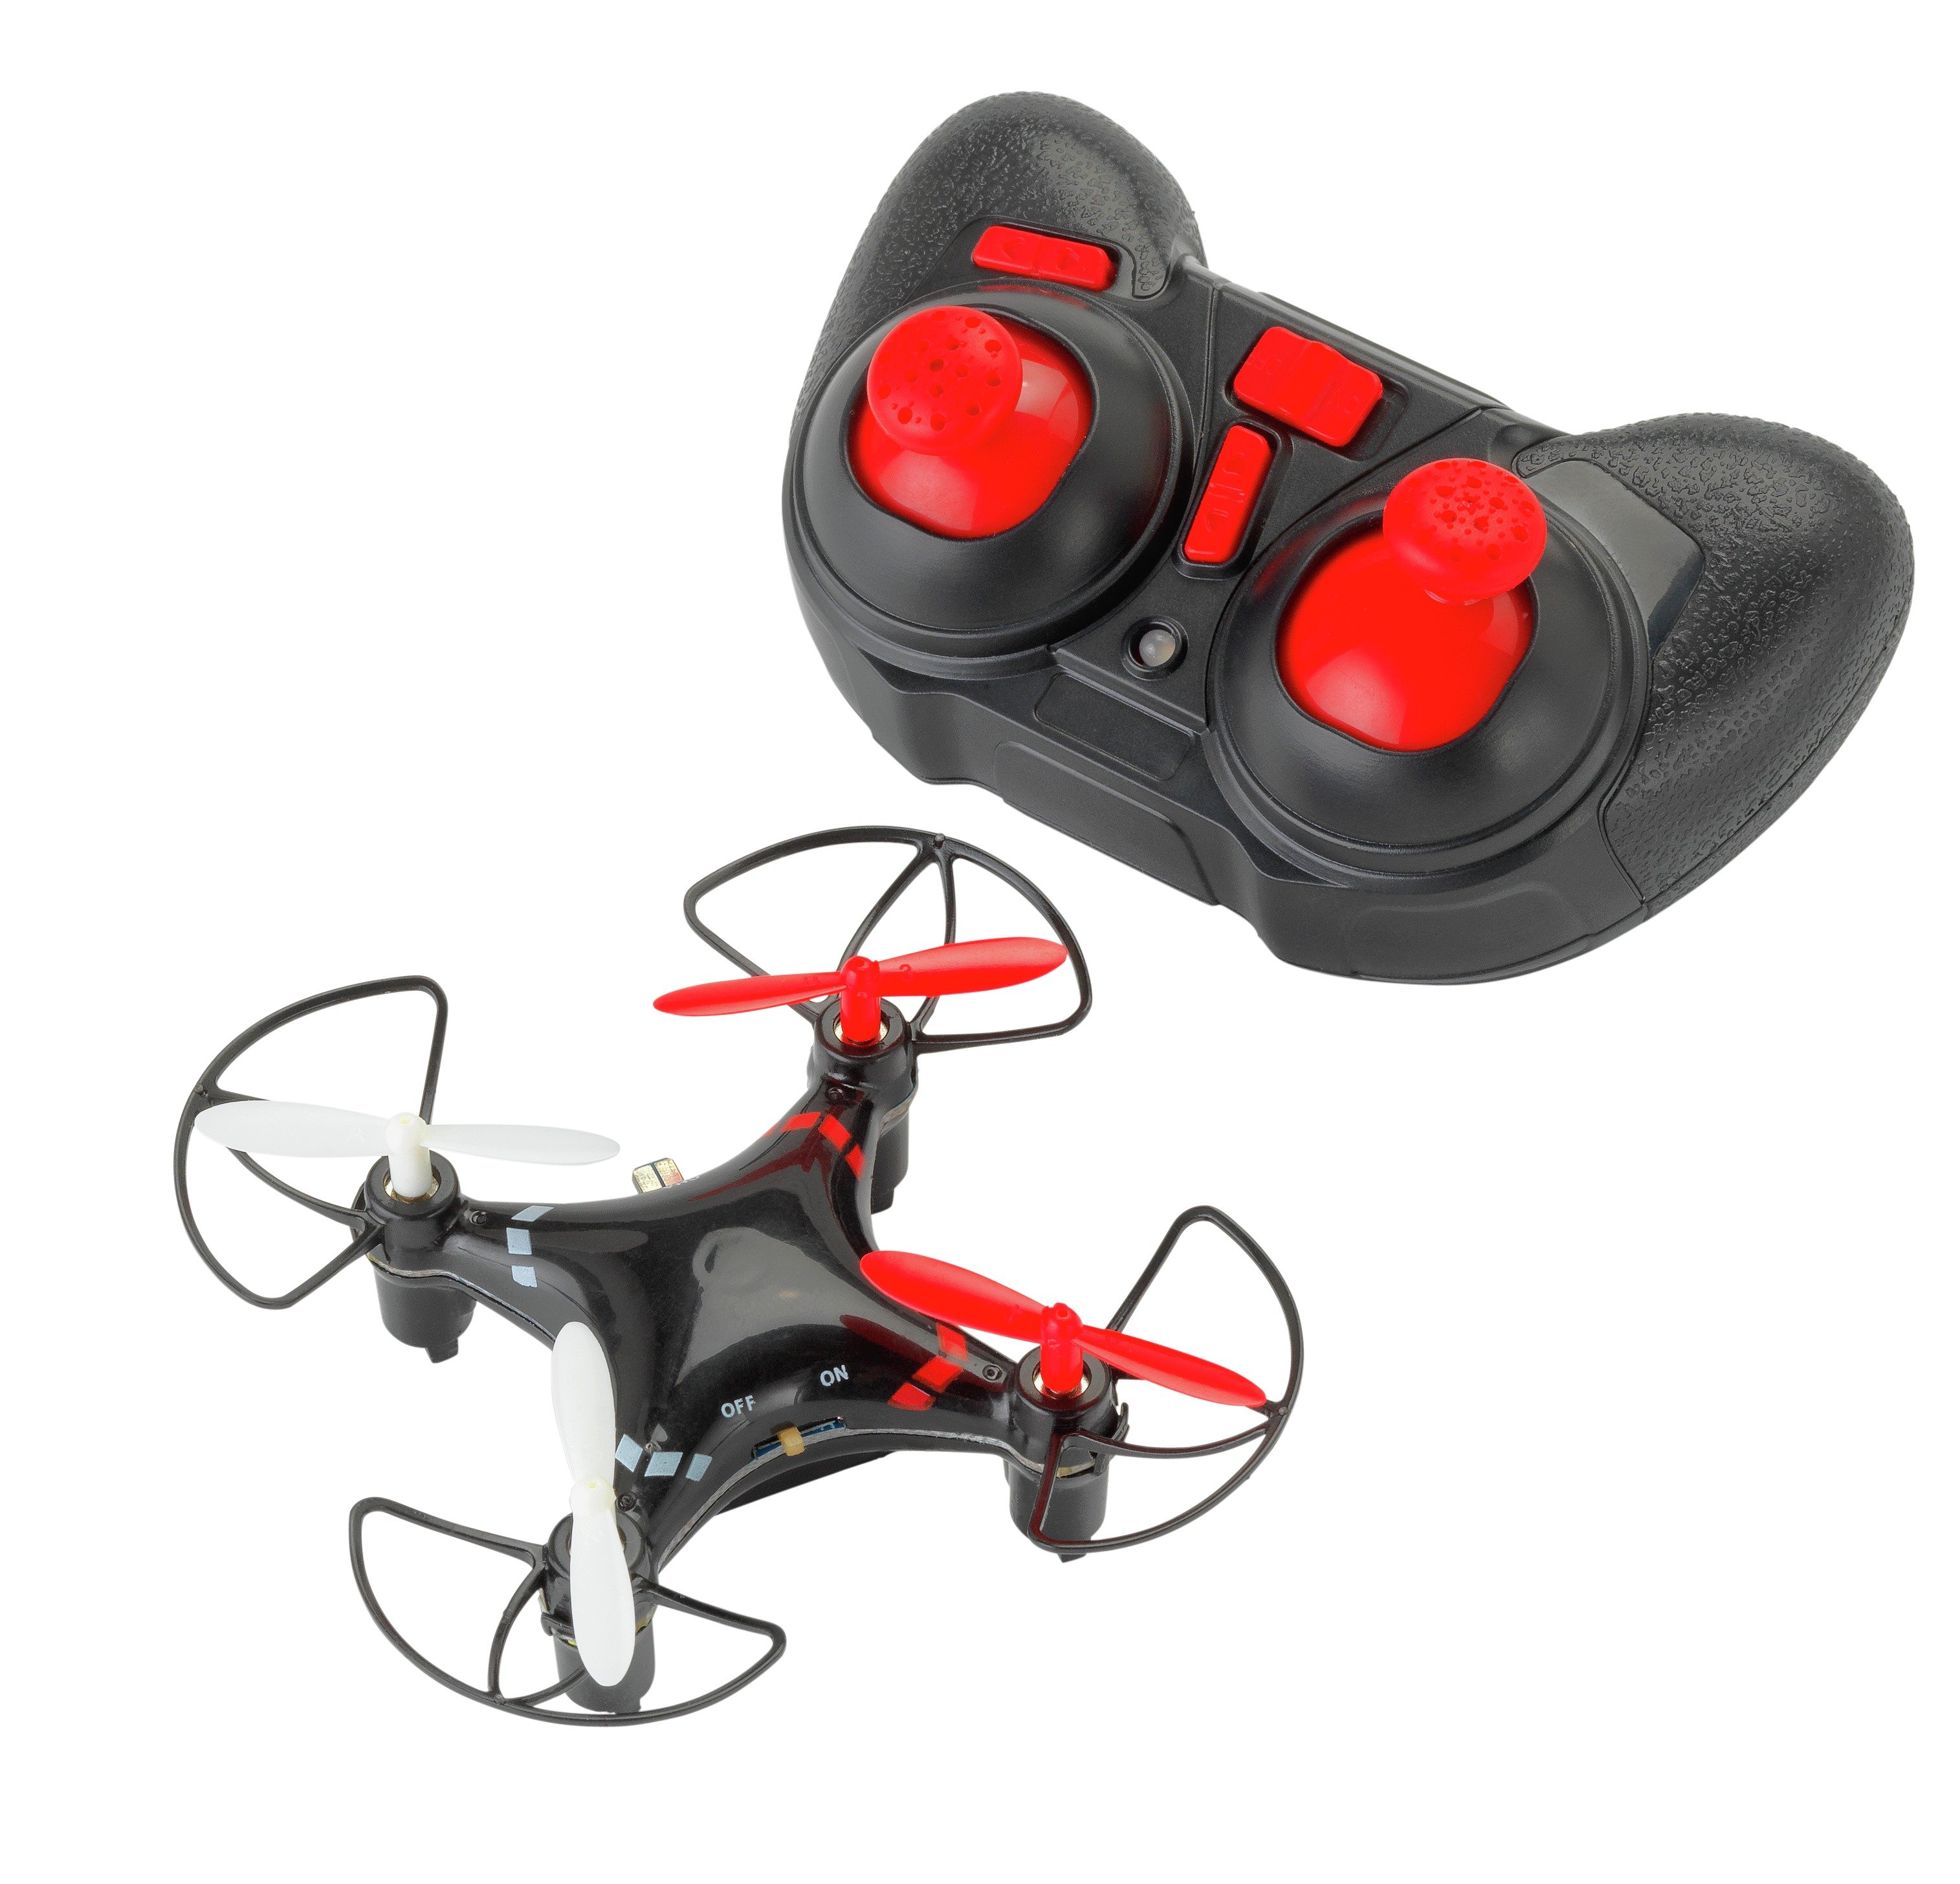 Buy Red5 Micro Drone V2 at Argos.co.uk - Your Online Shop for ...